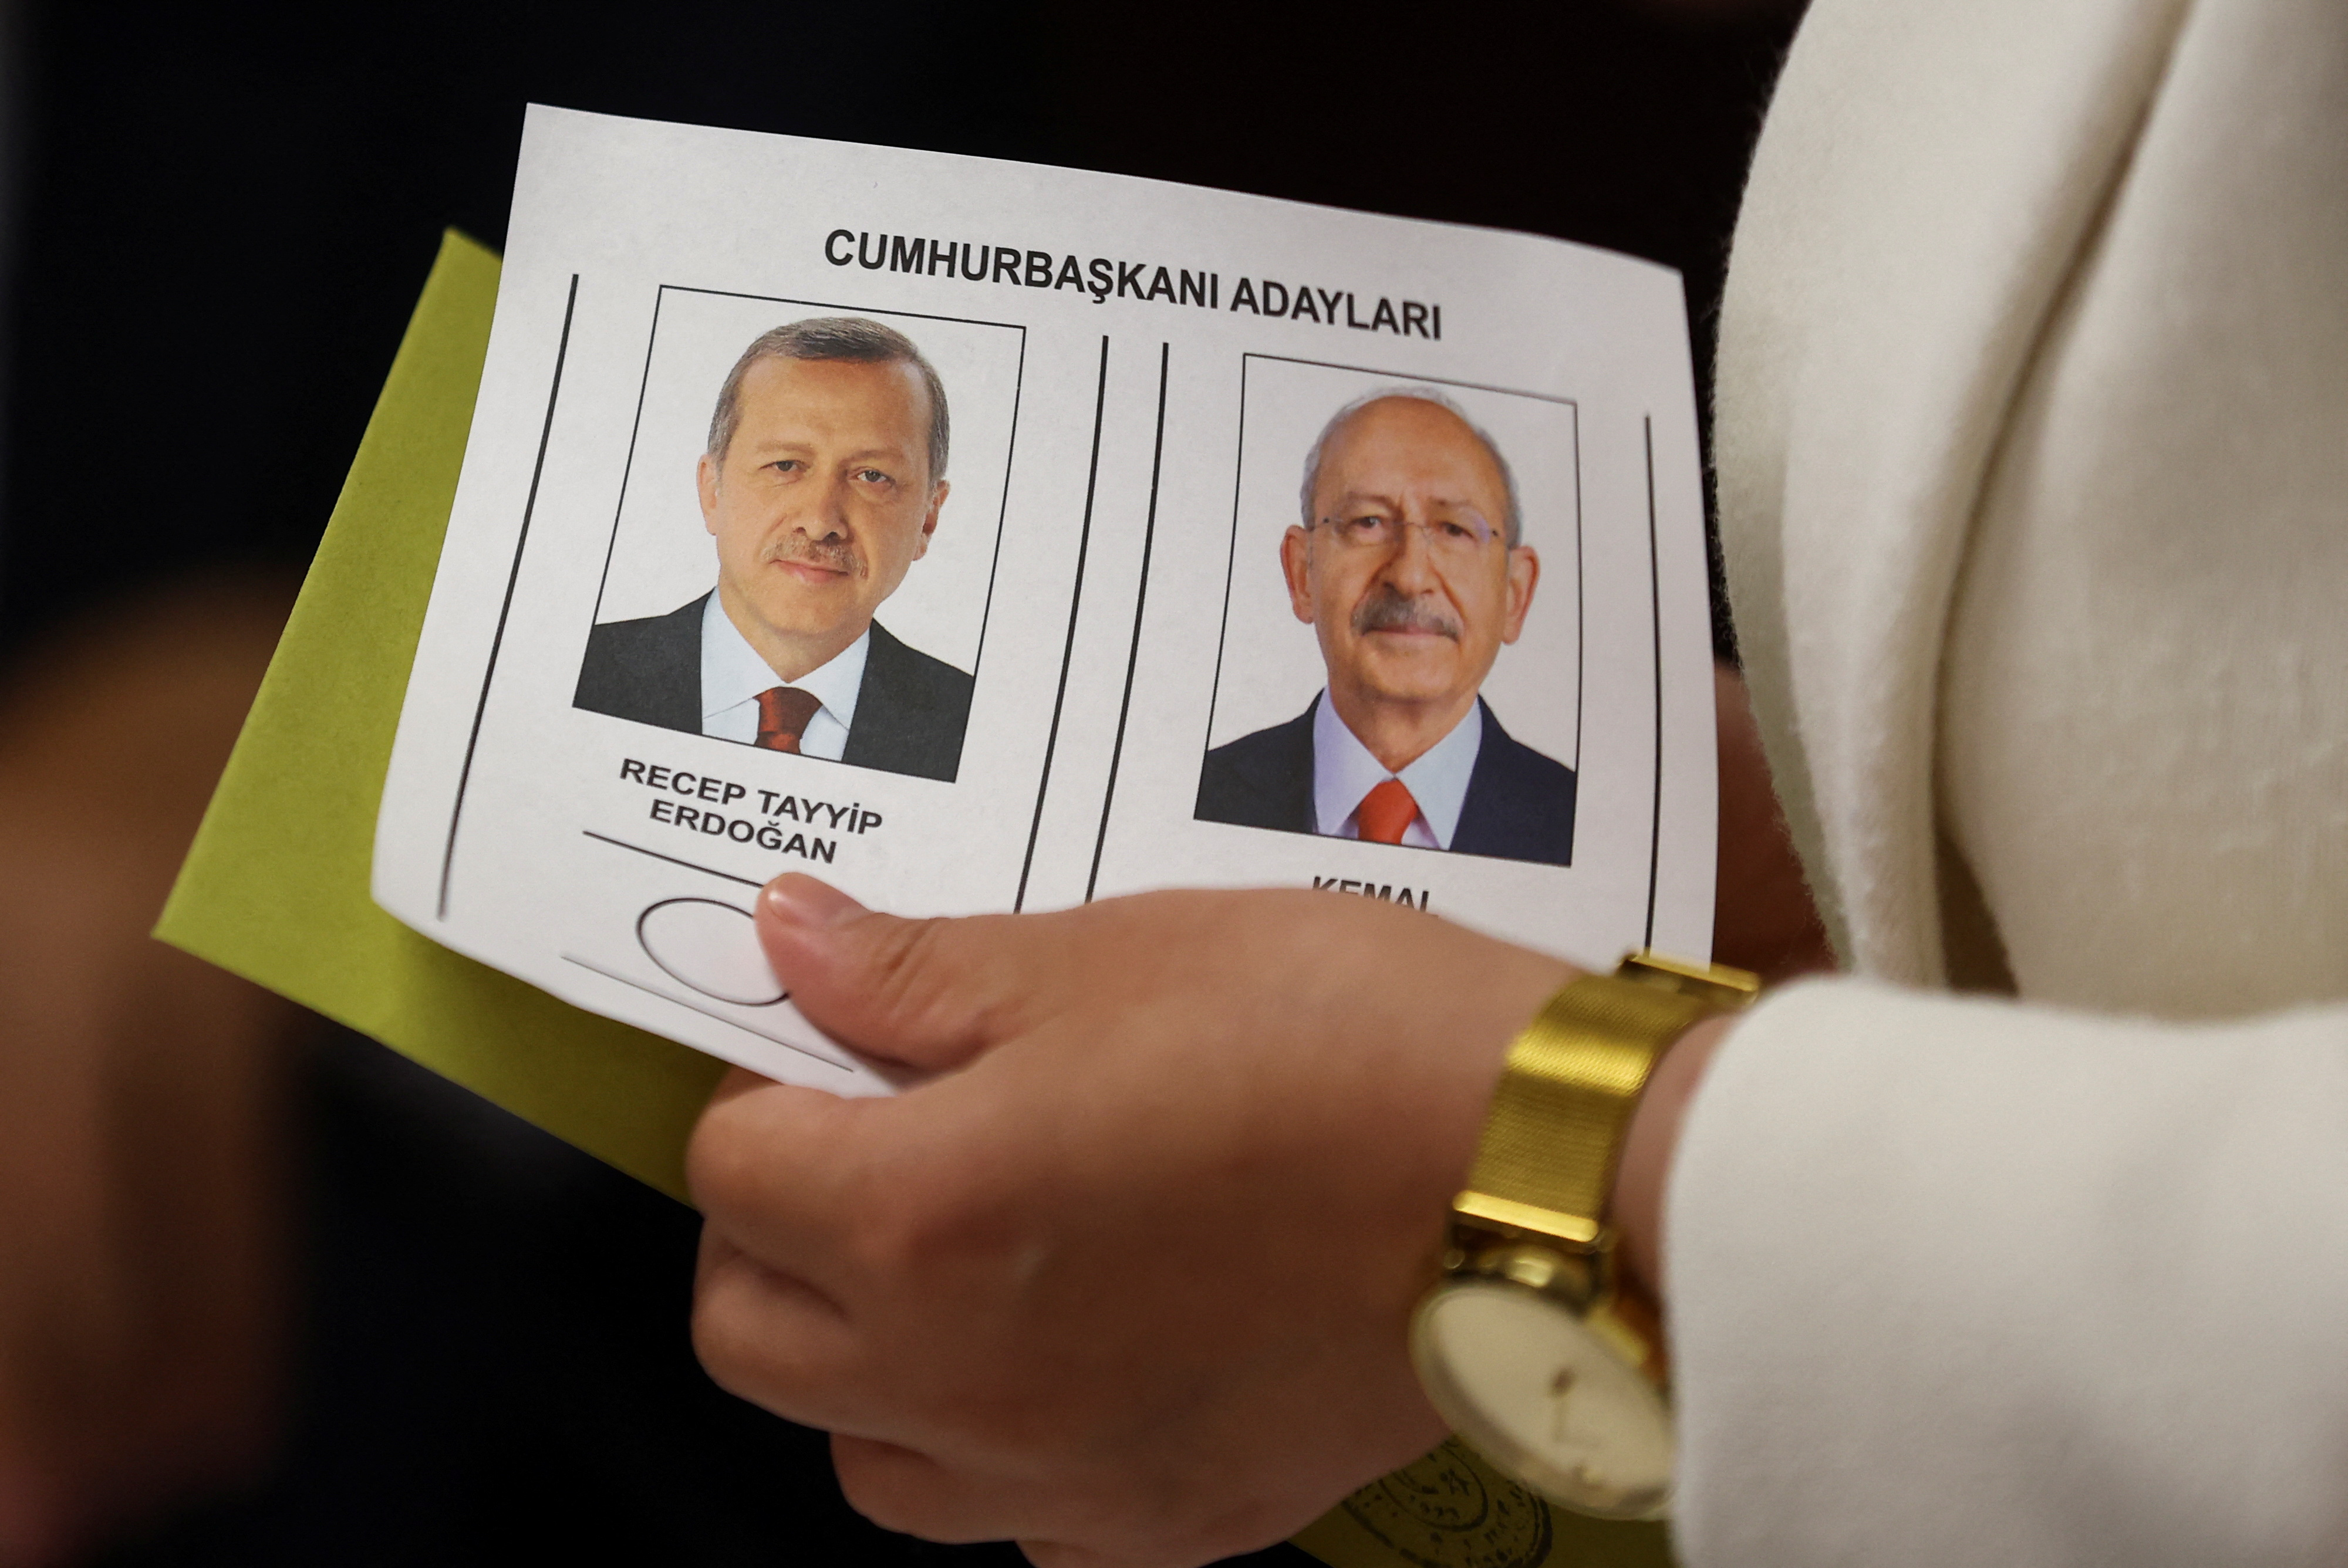 A person holds a ballot with pictures of Turkish President Tayyip Erdogan and presidential candidate of Turkey's main opposition alliance Kemal Kilicdaroglu at a polling station during the second round of the presidential election in Istanbul, Turkey May 28, 2023. REUTERS/Hannah McKay